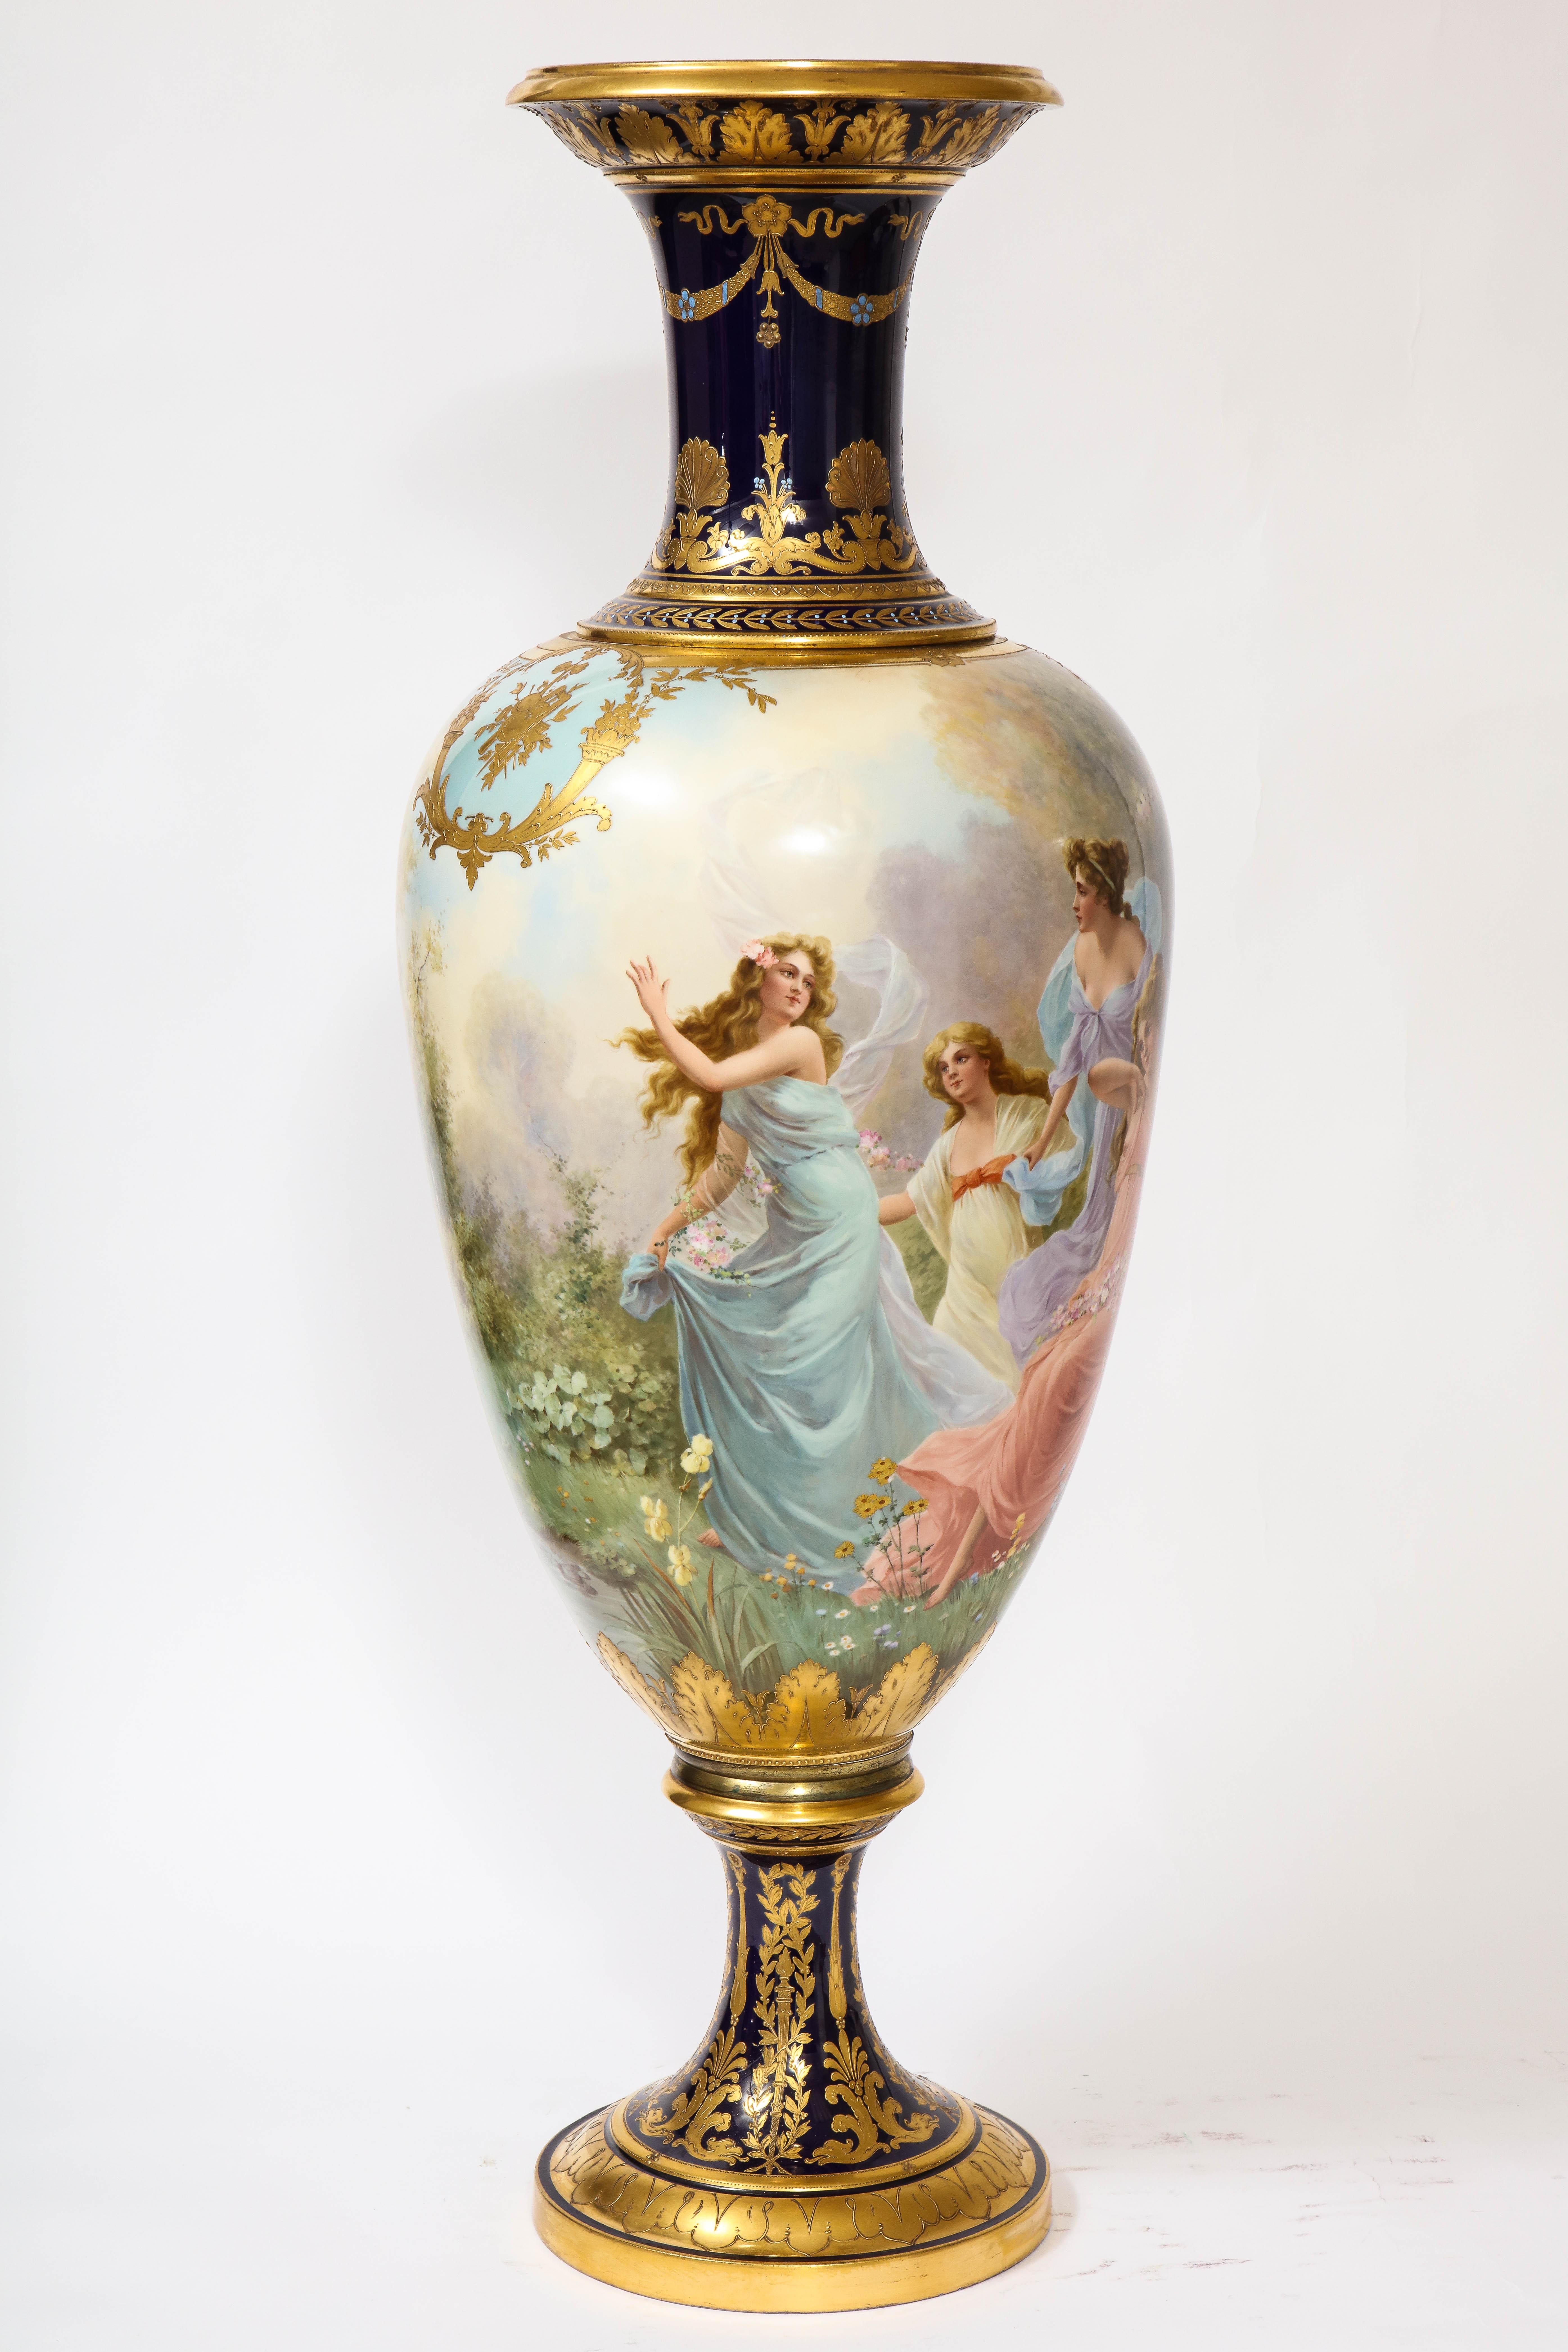 A Monumental and Exquisite Royal Vienna Porcelain cobalt blue ground turquoise jeweled vase, signed by the artist: O. Zwierzina, Lenzesfreuden. The center body is gorgeously hand painted with a continuum of four maidens, classically-dressed in a